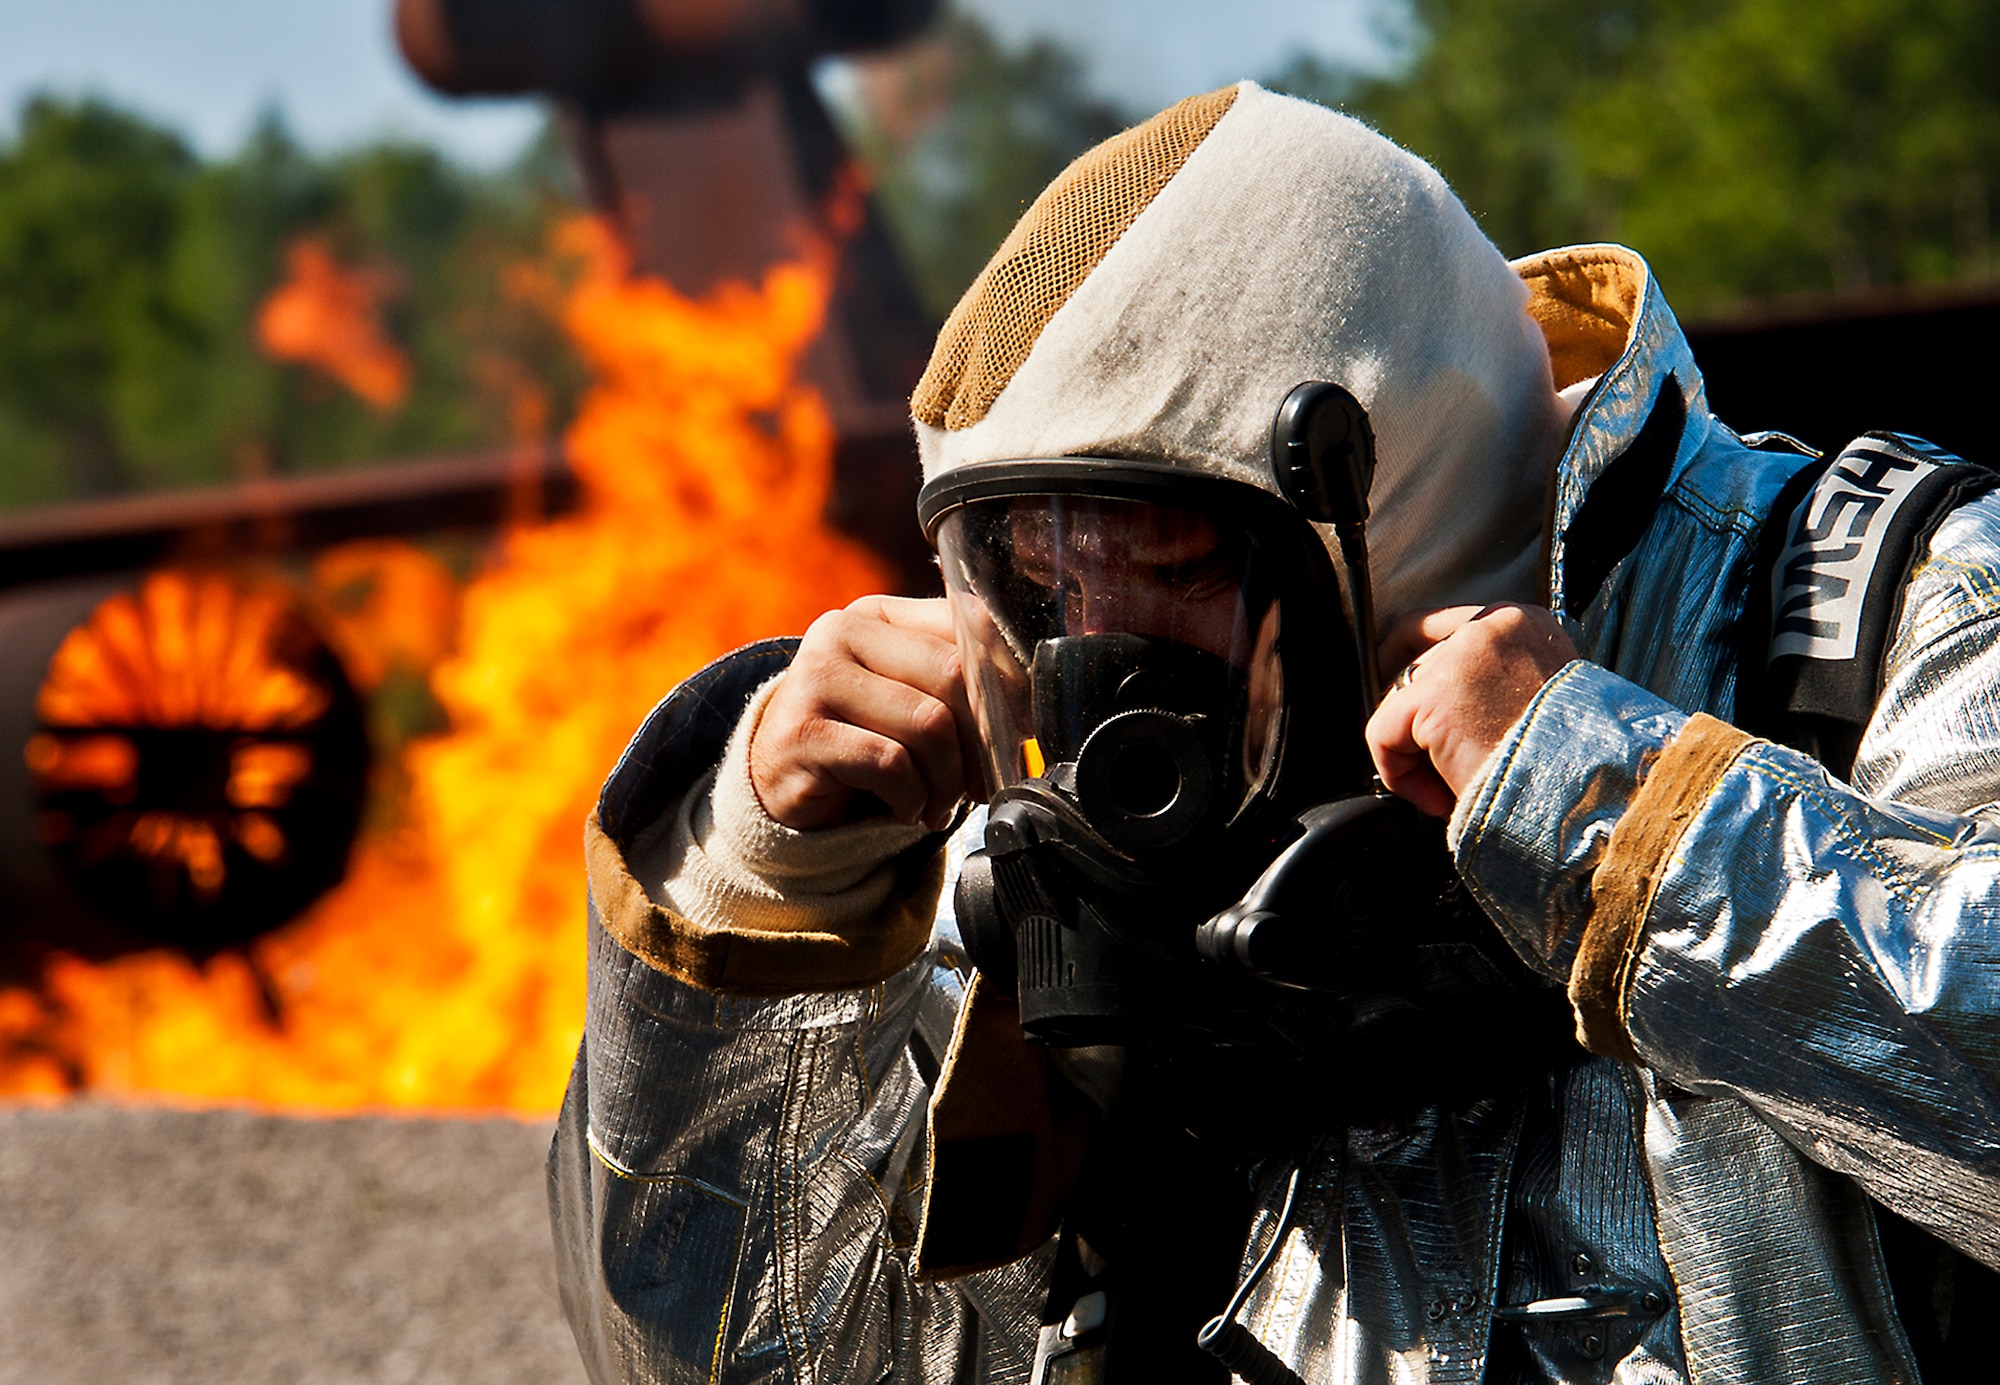 Tech. Sgt. Steve Waltermon, a 919th Special Operations Wing firefighter, adjusts his gas mask prior to battling a blaze during an aircraft fire training scenario at Hurlburt Field, Fla., April 13.  More than 10 of Duke Field’s firemen braved the flames of the aircraft burn pit for this annual refresher training.  (U.S. Air Force photo/Tech. Sgt. Samuel King Jr.)